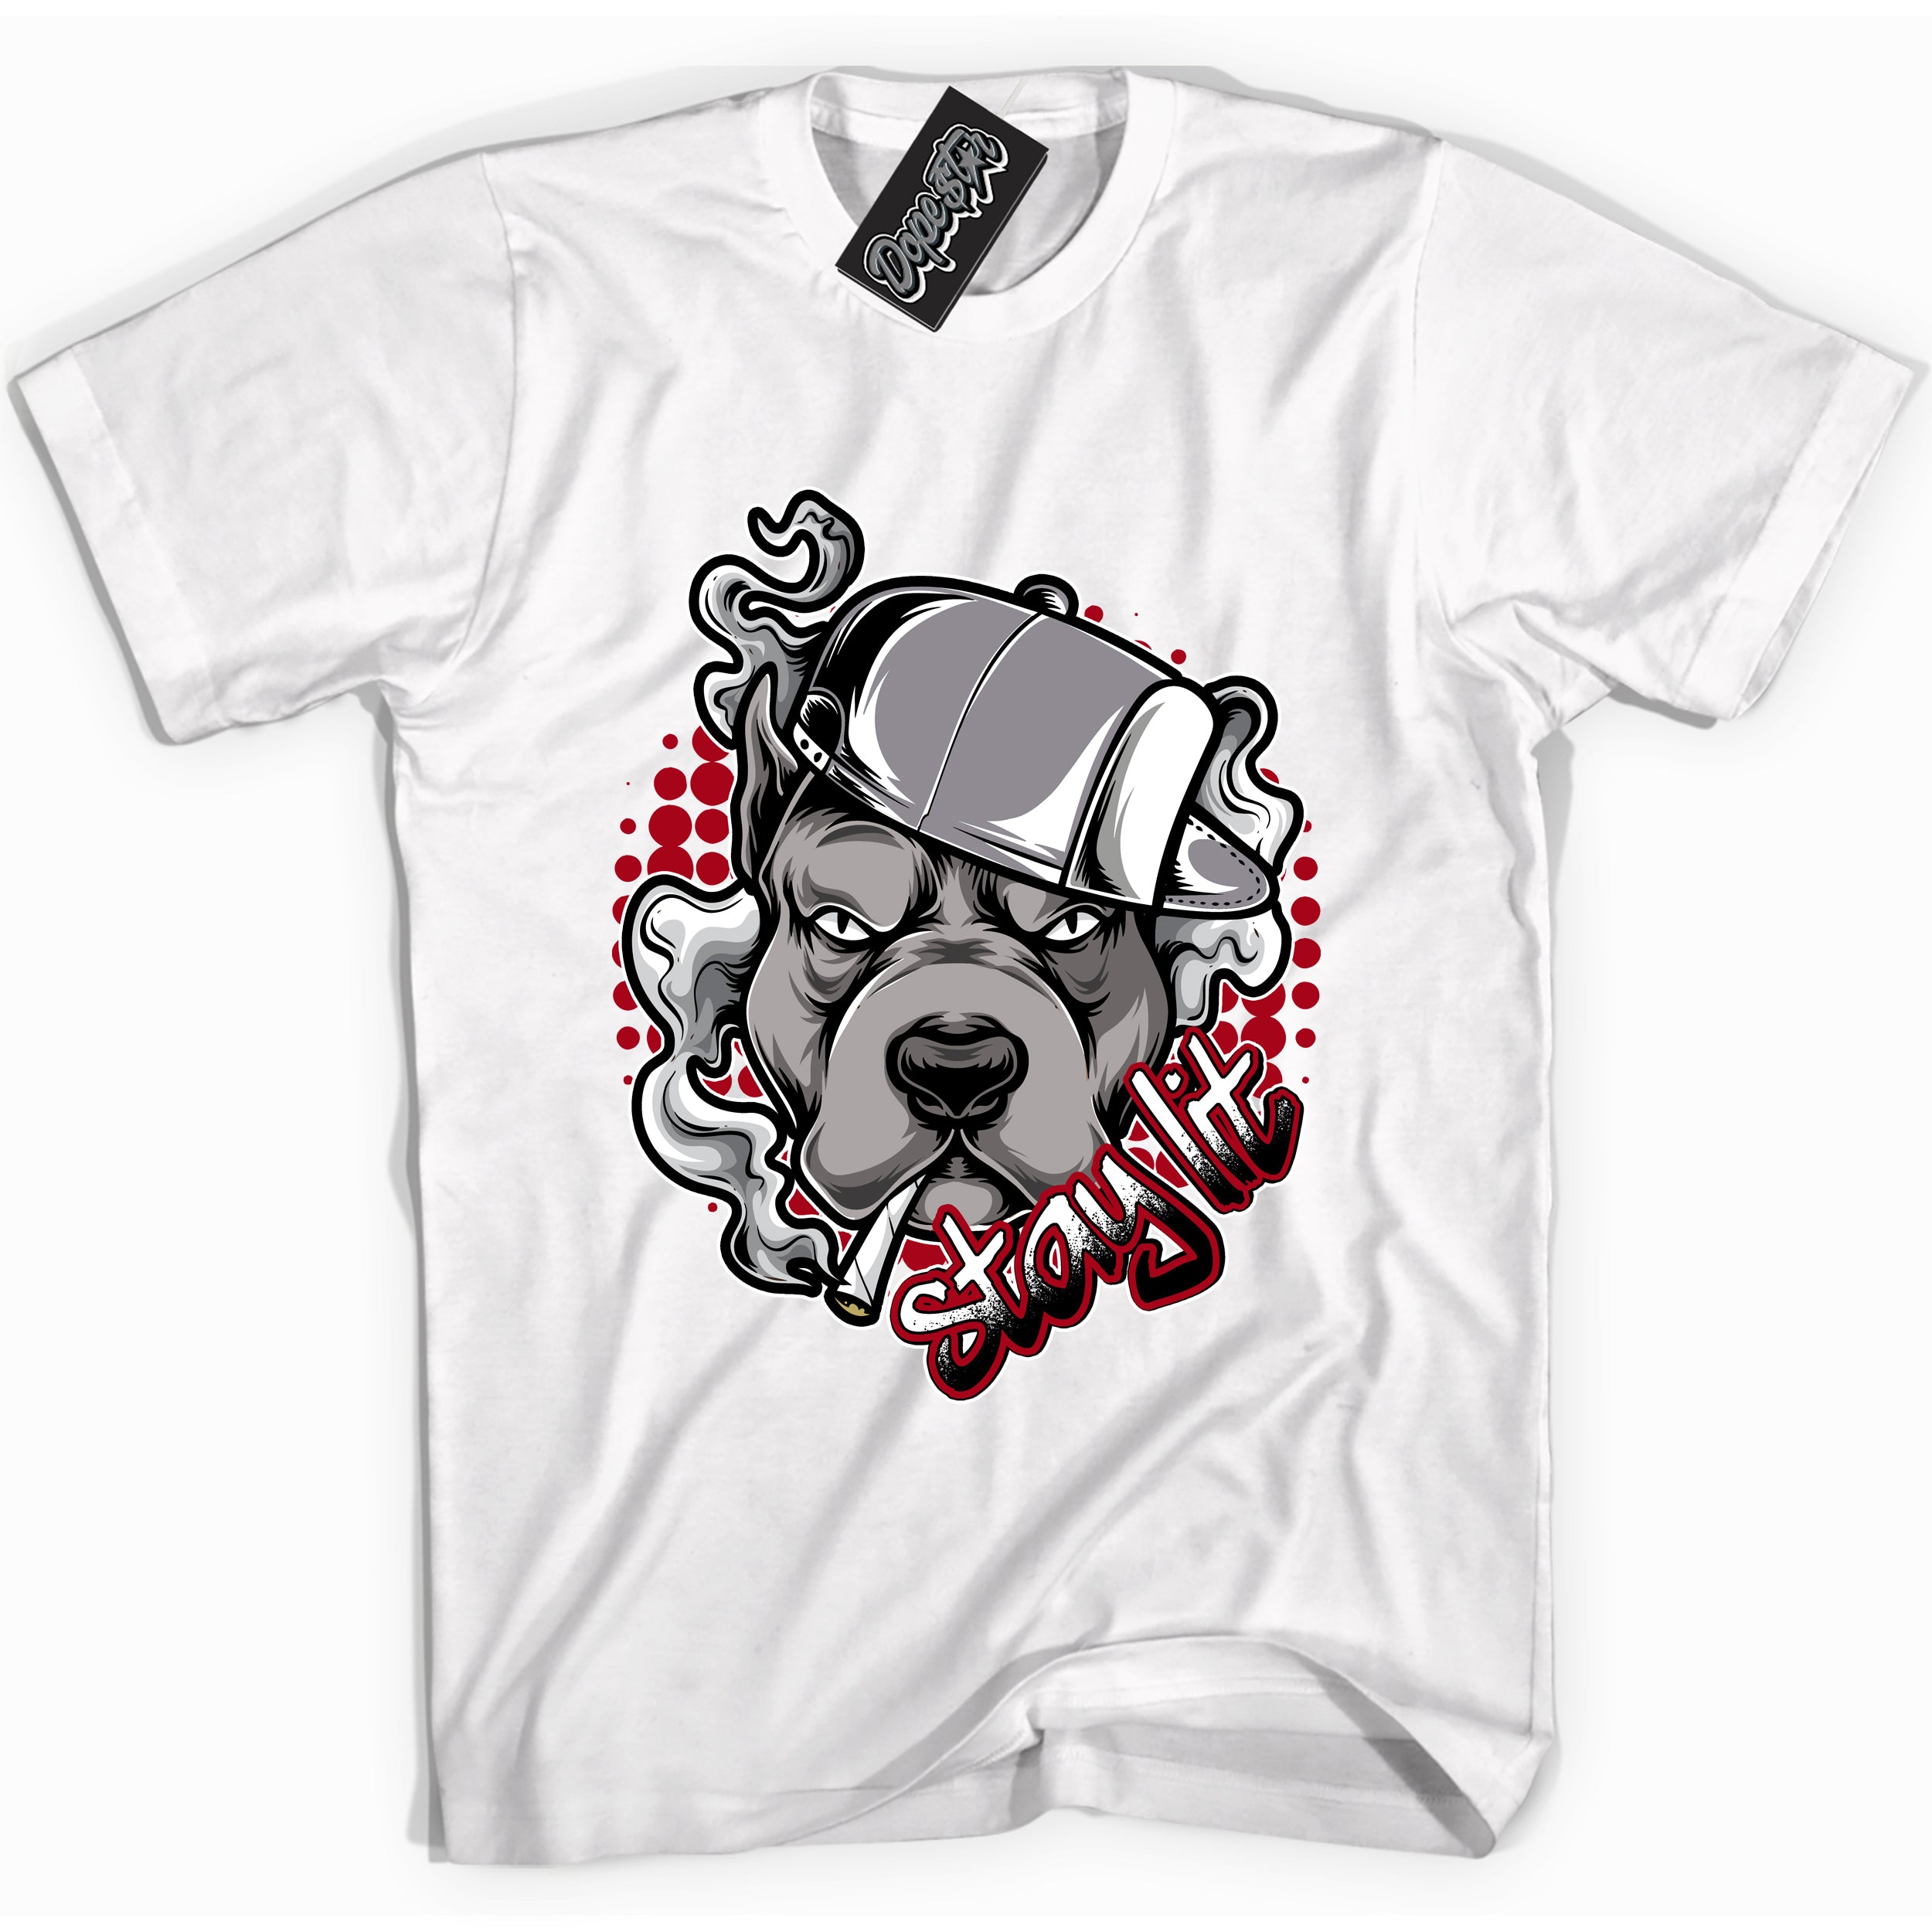 Cool White Shirt with “ Stay Lit” design that perfectly matches Bred Reimagined 4s Jordans.